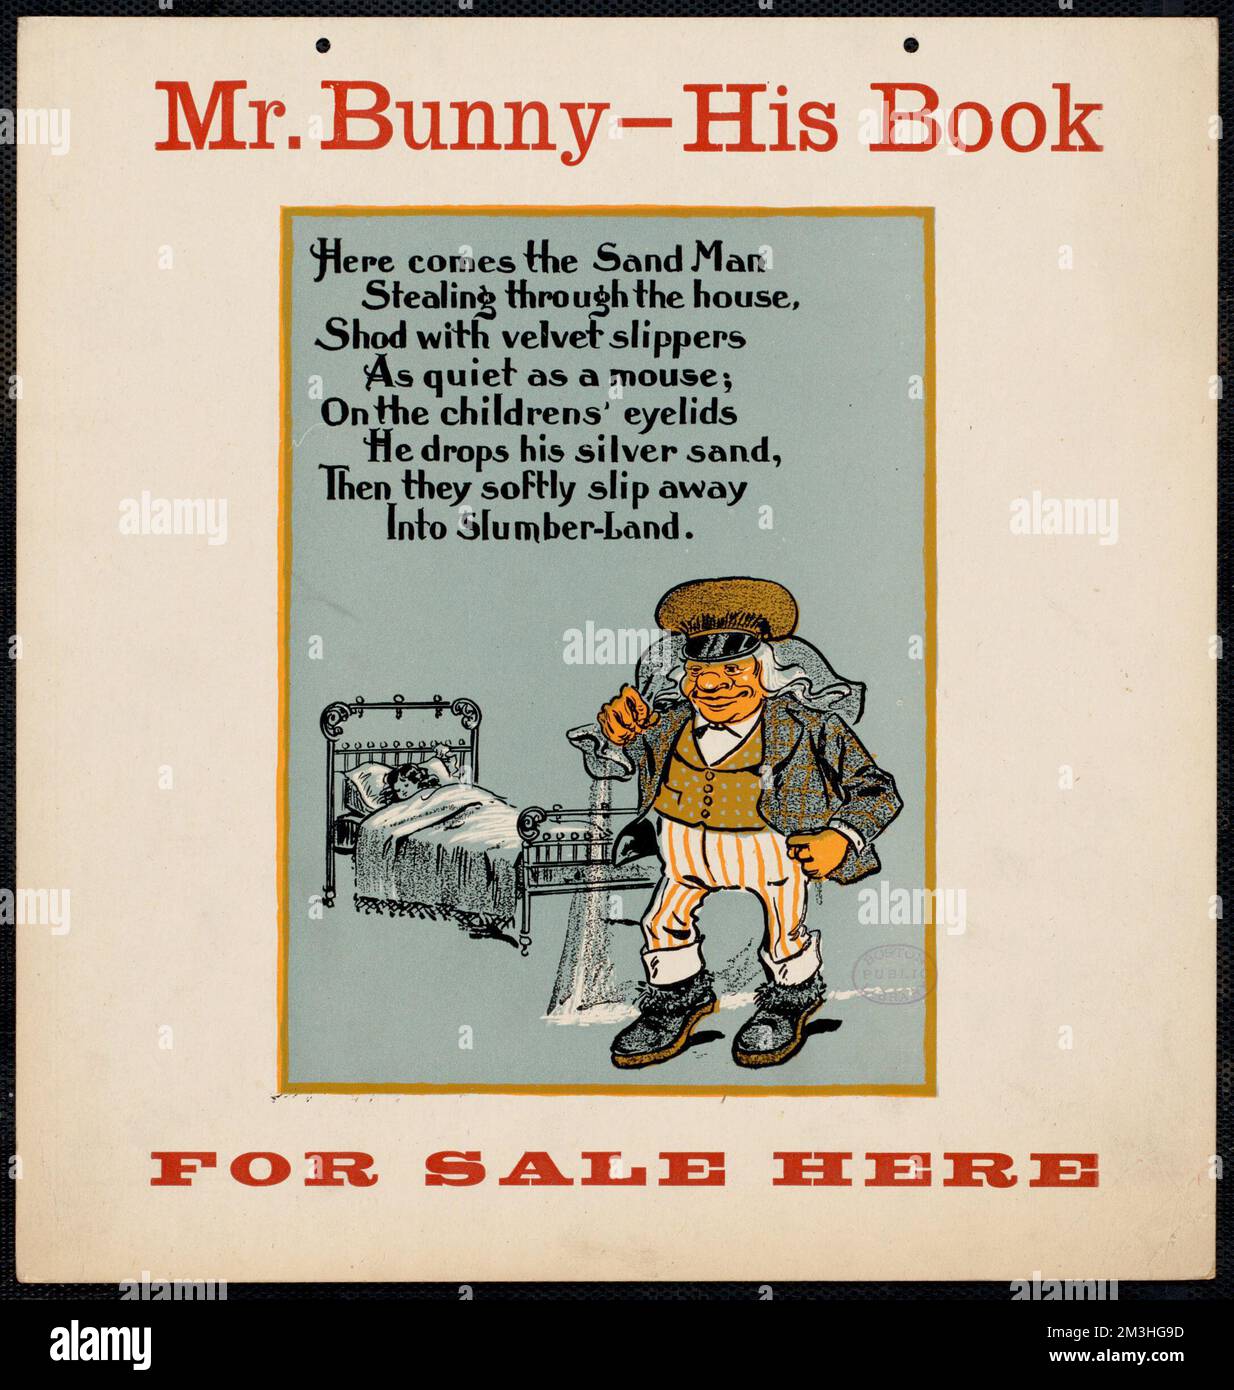 Mr. Bunny - his book, for sale here , Girls, Supernatural beings, Books, Sleeping, Sandman Legendary character Stock Photo